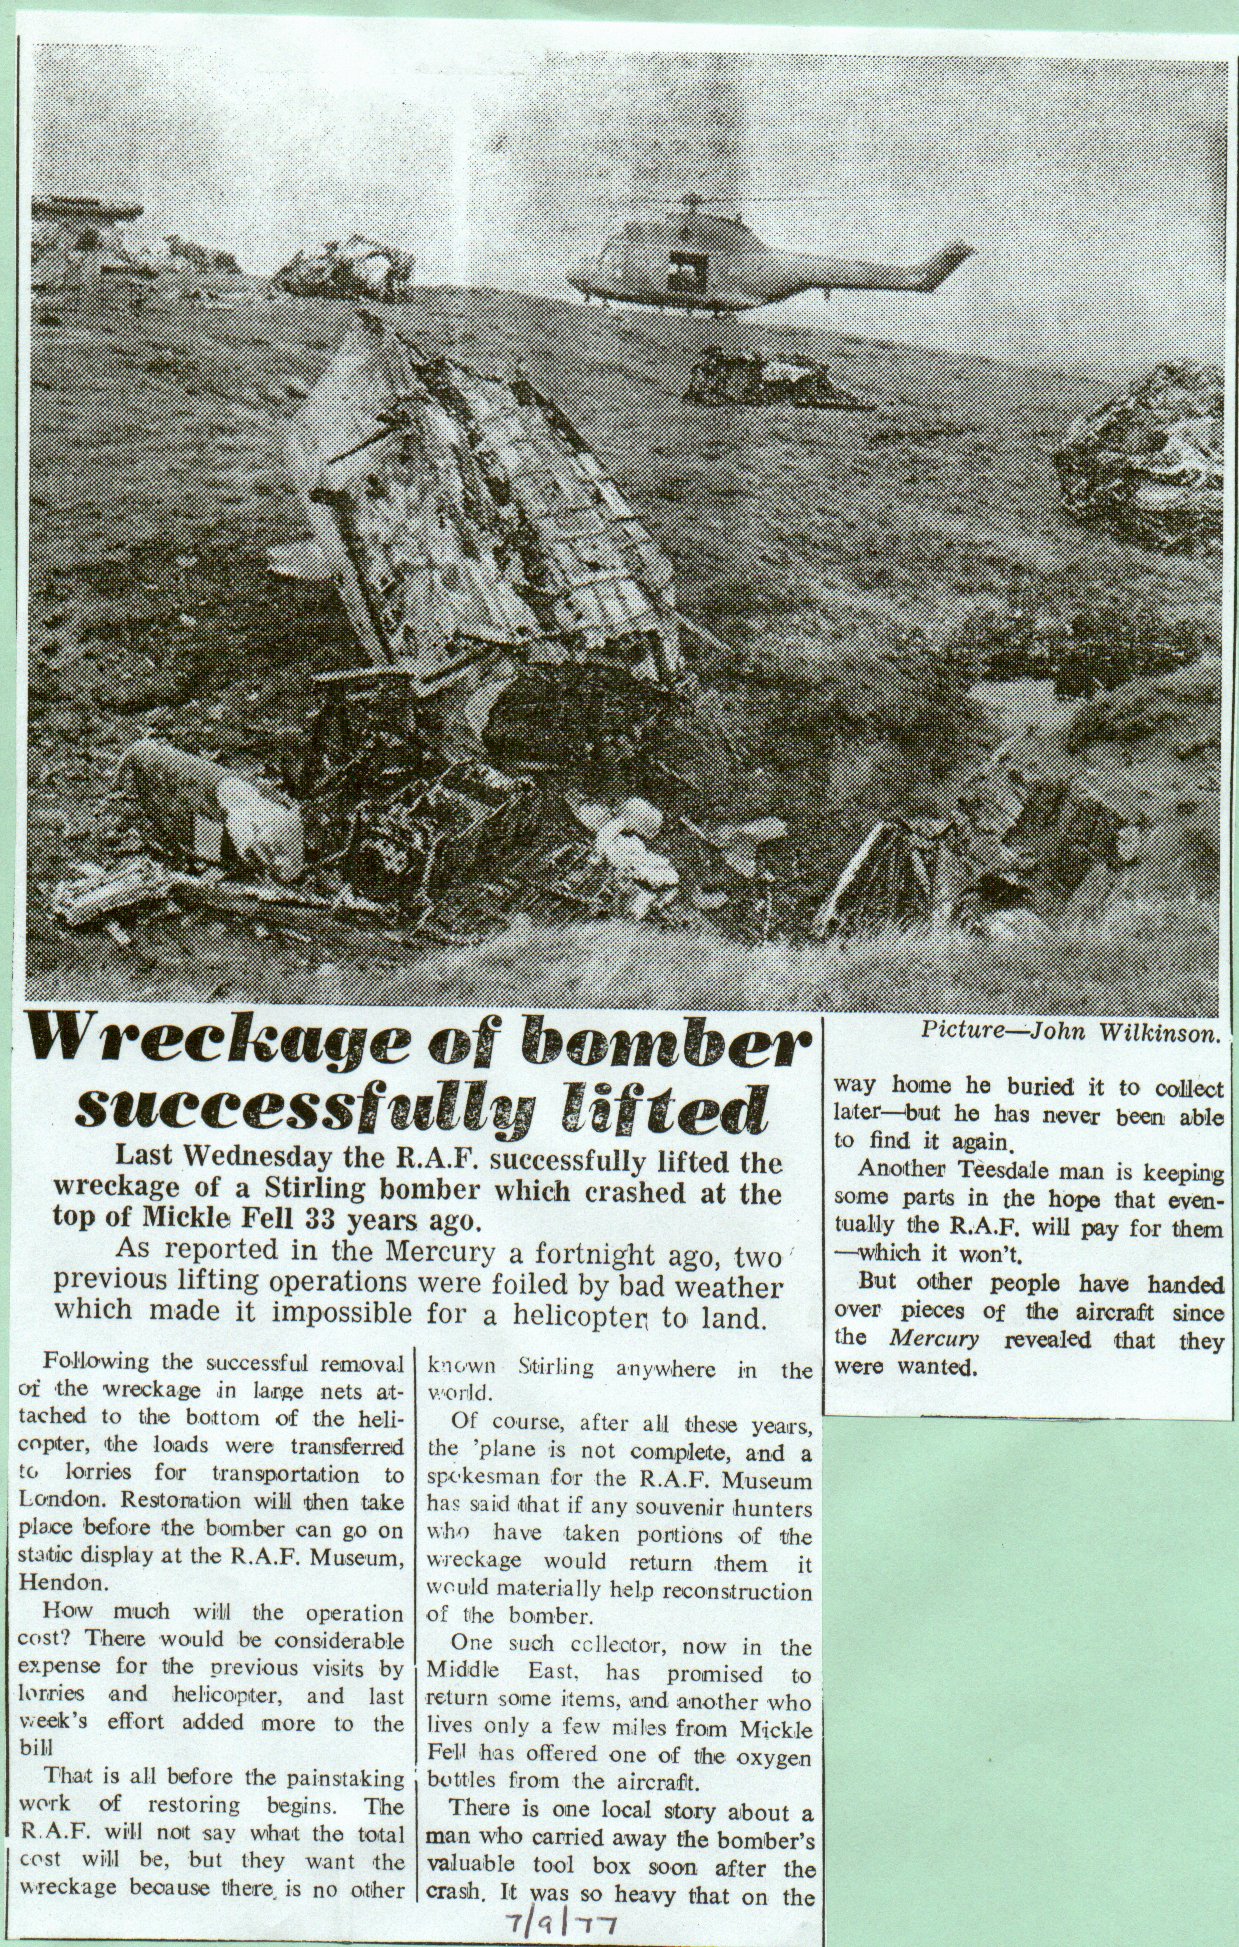  Wreckage of bomber successfully lifted

photo, Mickle Fell, history, plane crash